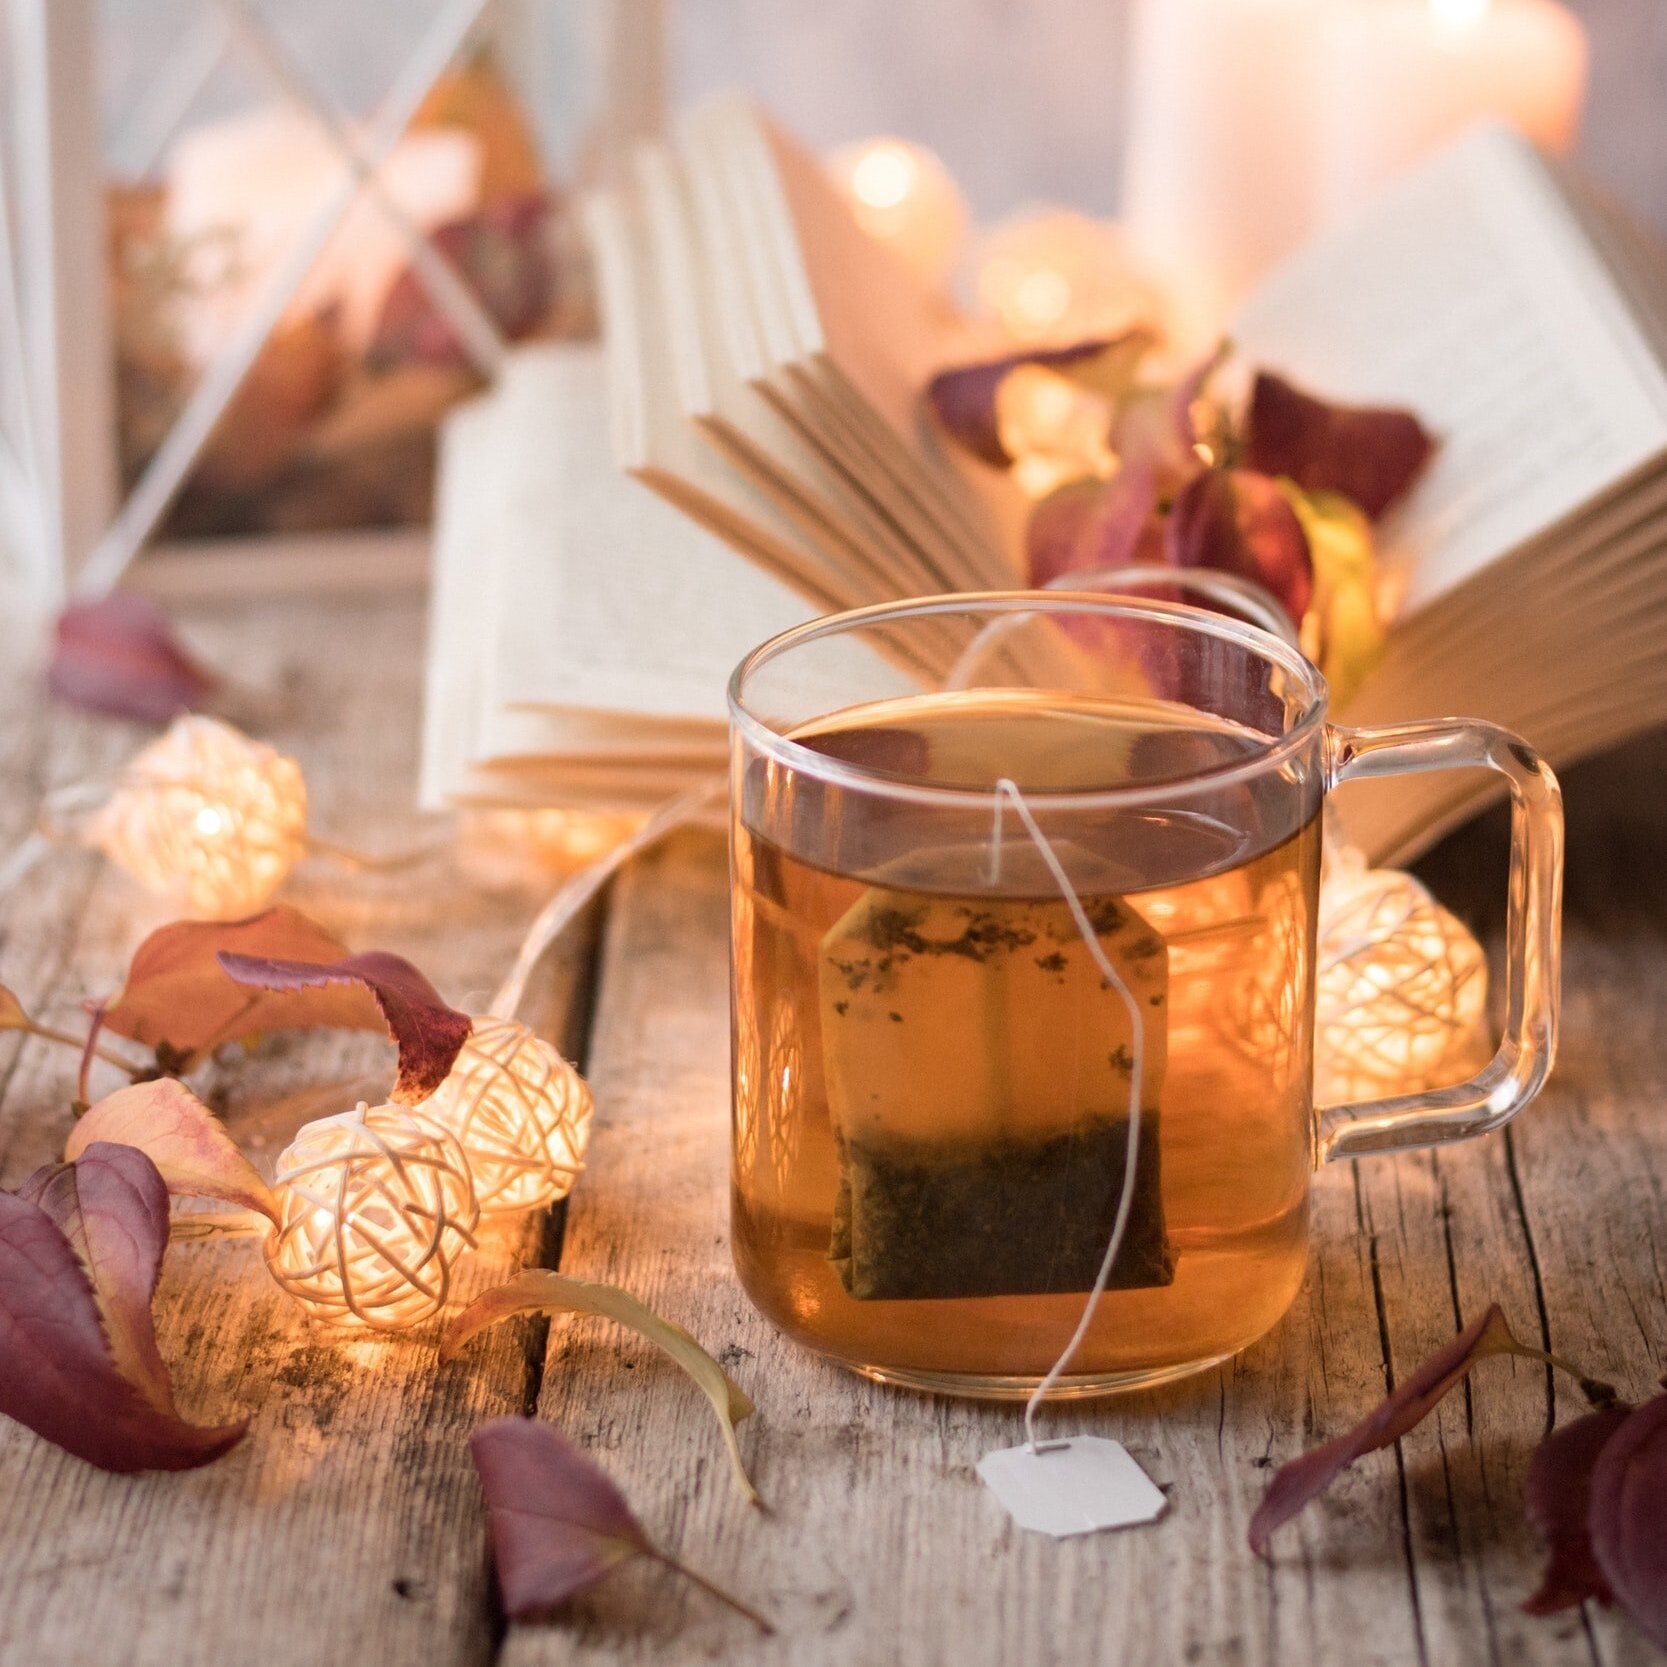 World Brand Lab Releases Its '2021 Global Top 10 Luxury Tea Brands